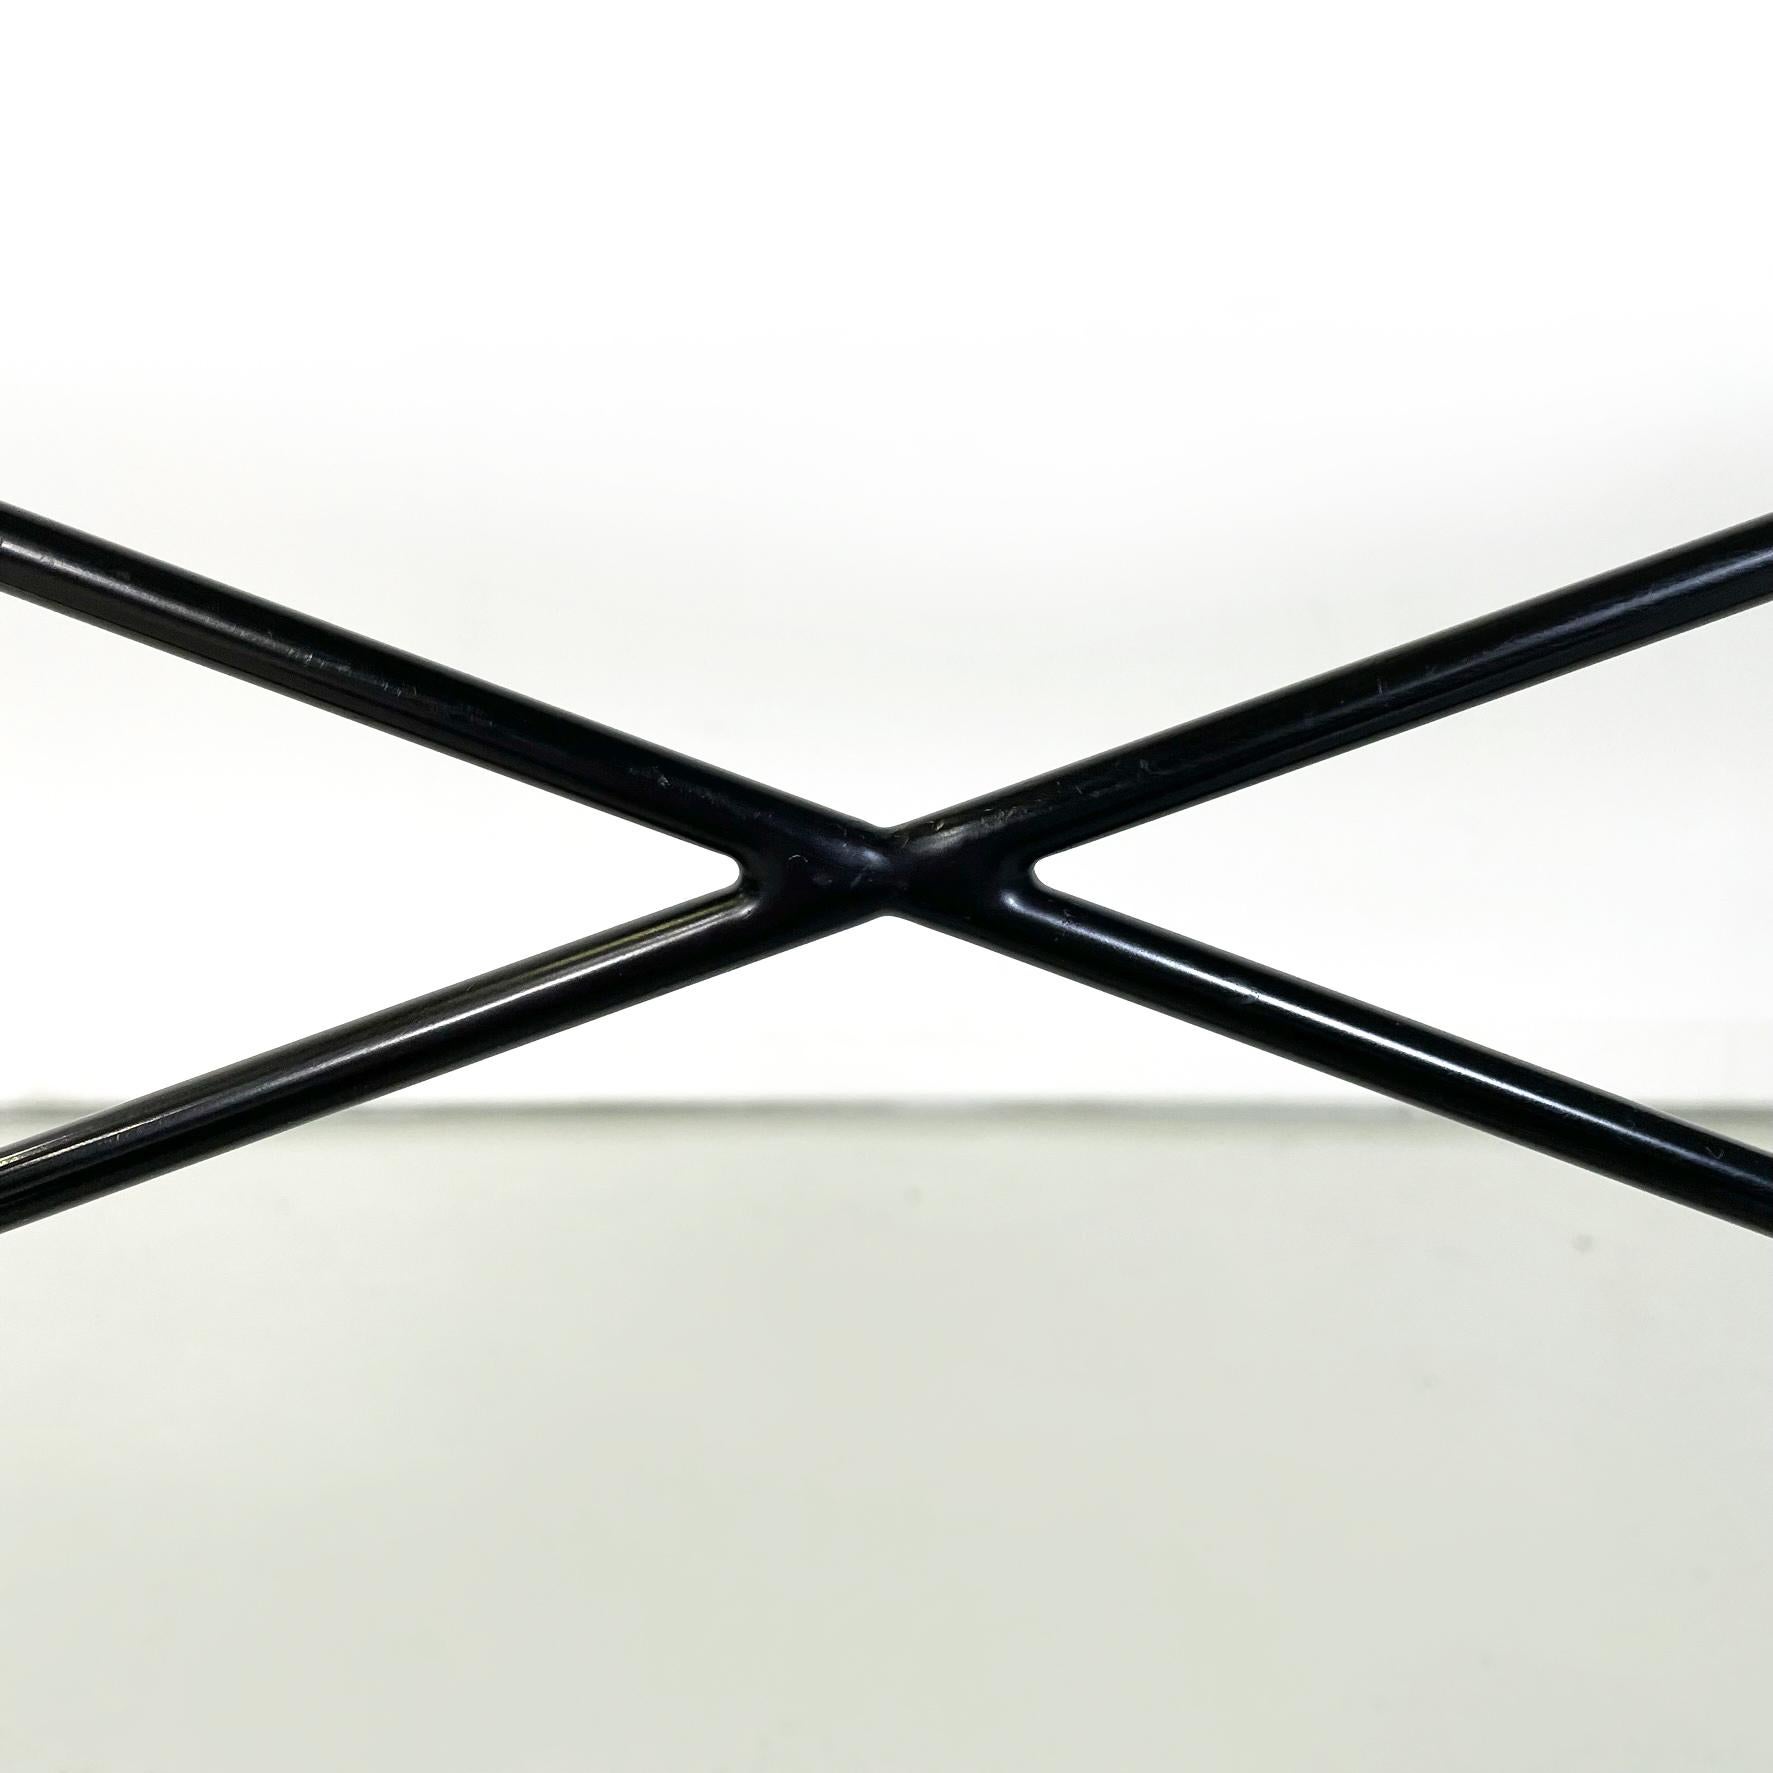 Italian Bauhaus Modern Dining Table Asnago by Mario Asnago for Pallucco, 1990s For Sale 6